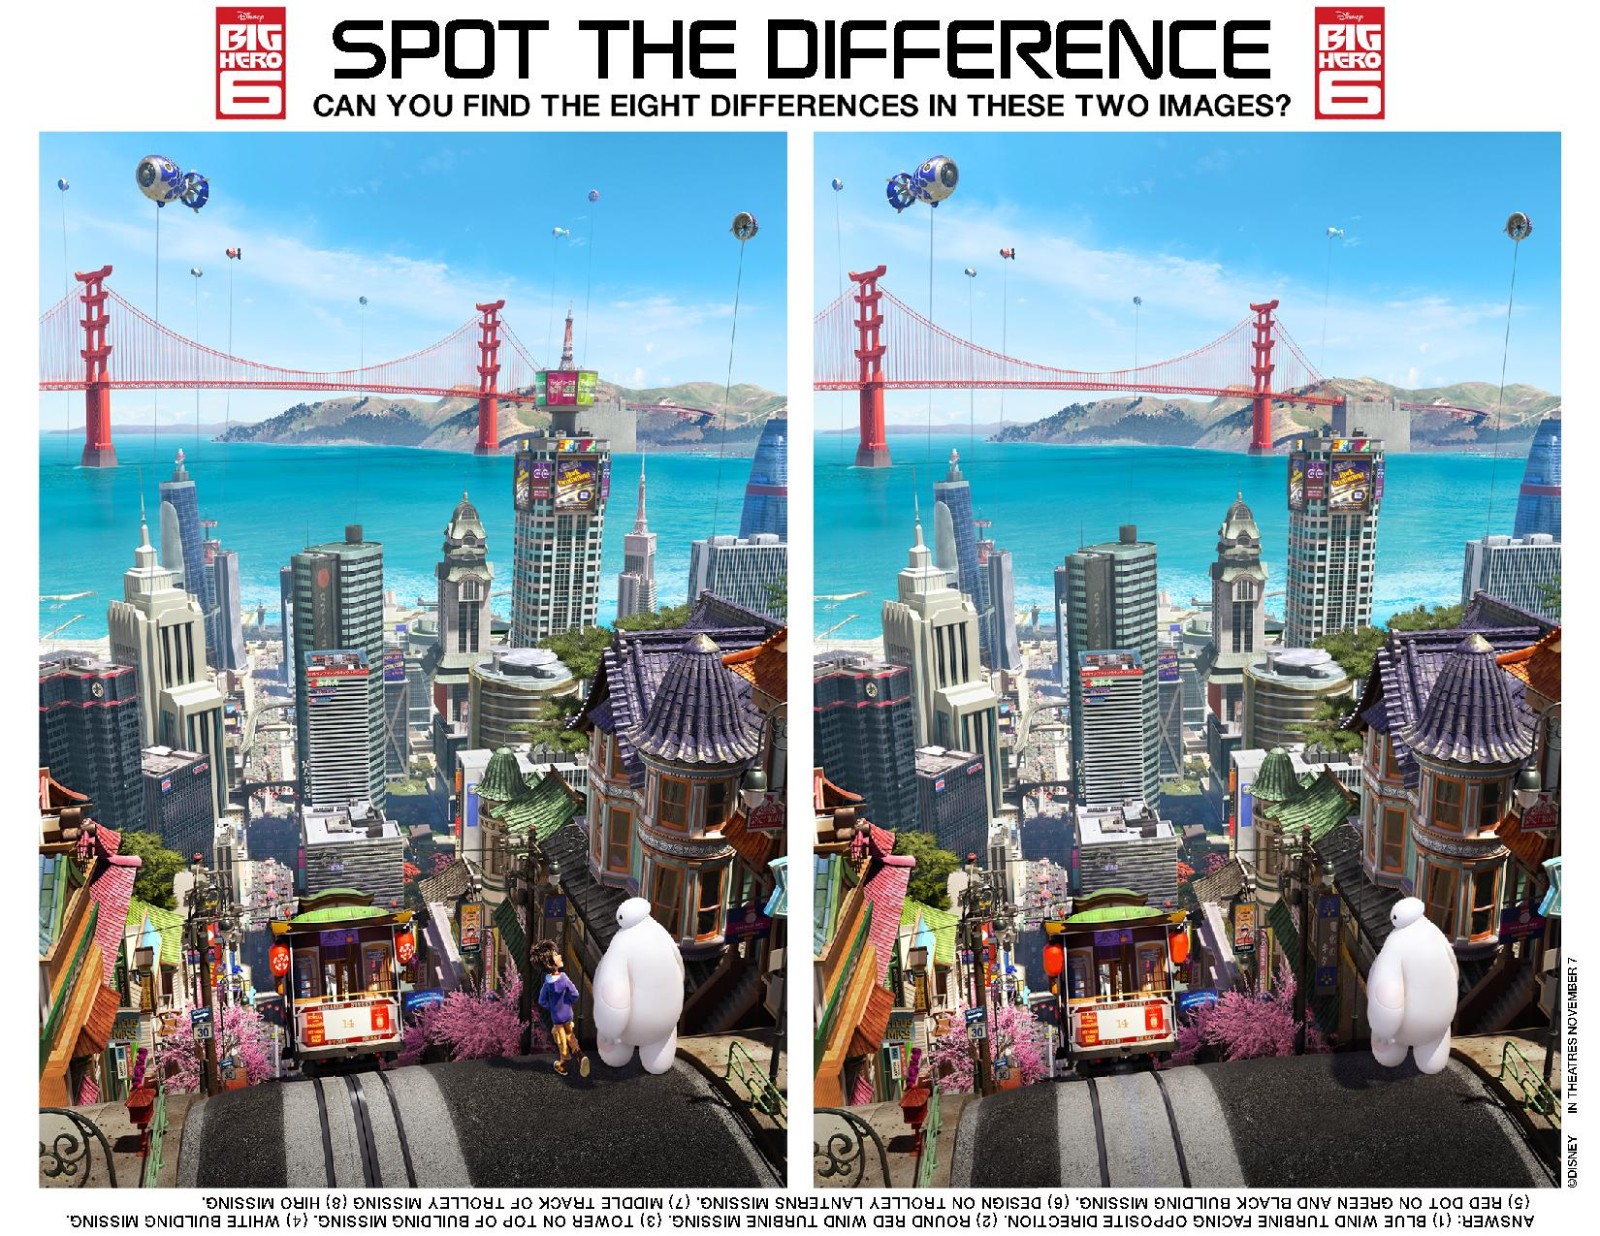 Big Hero 6 Spot the Difference